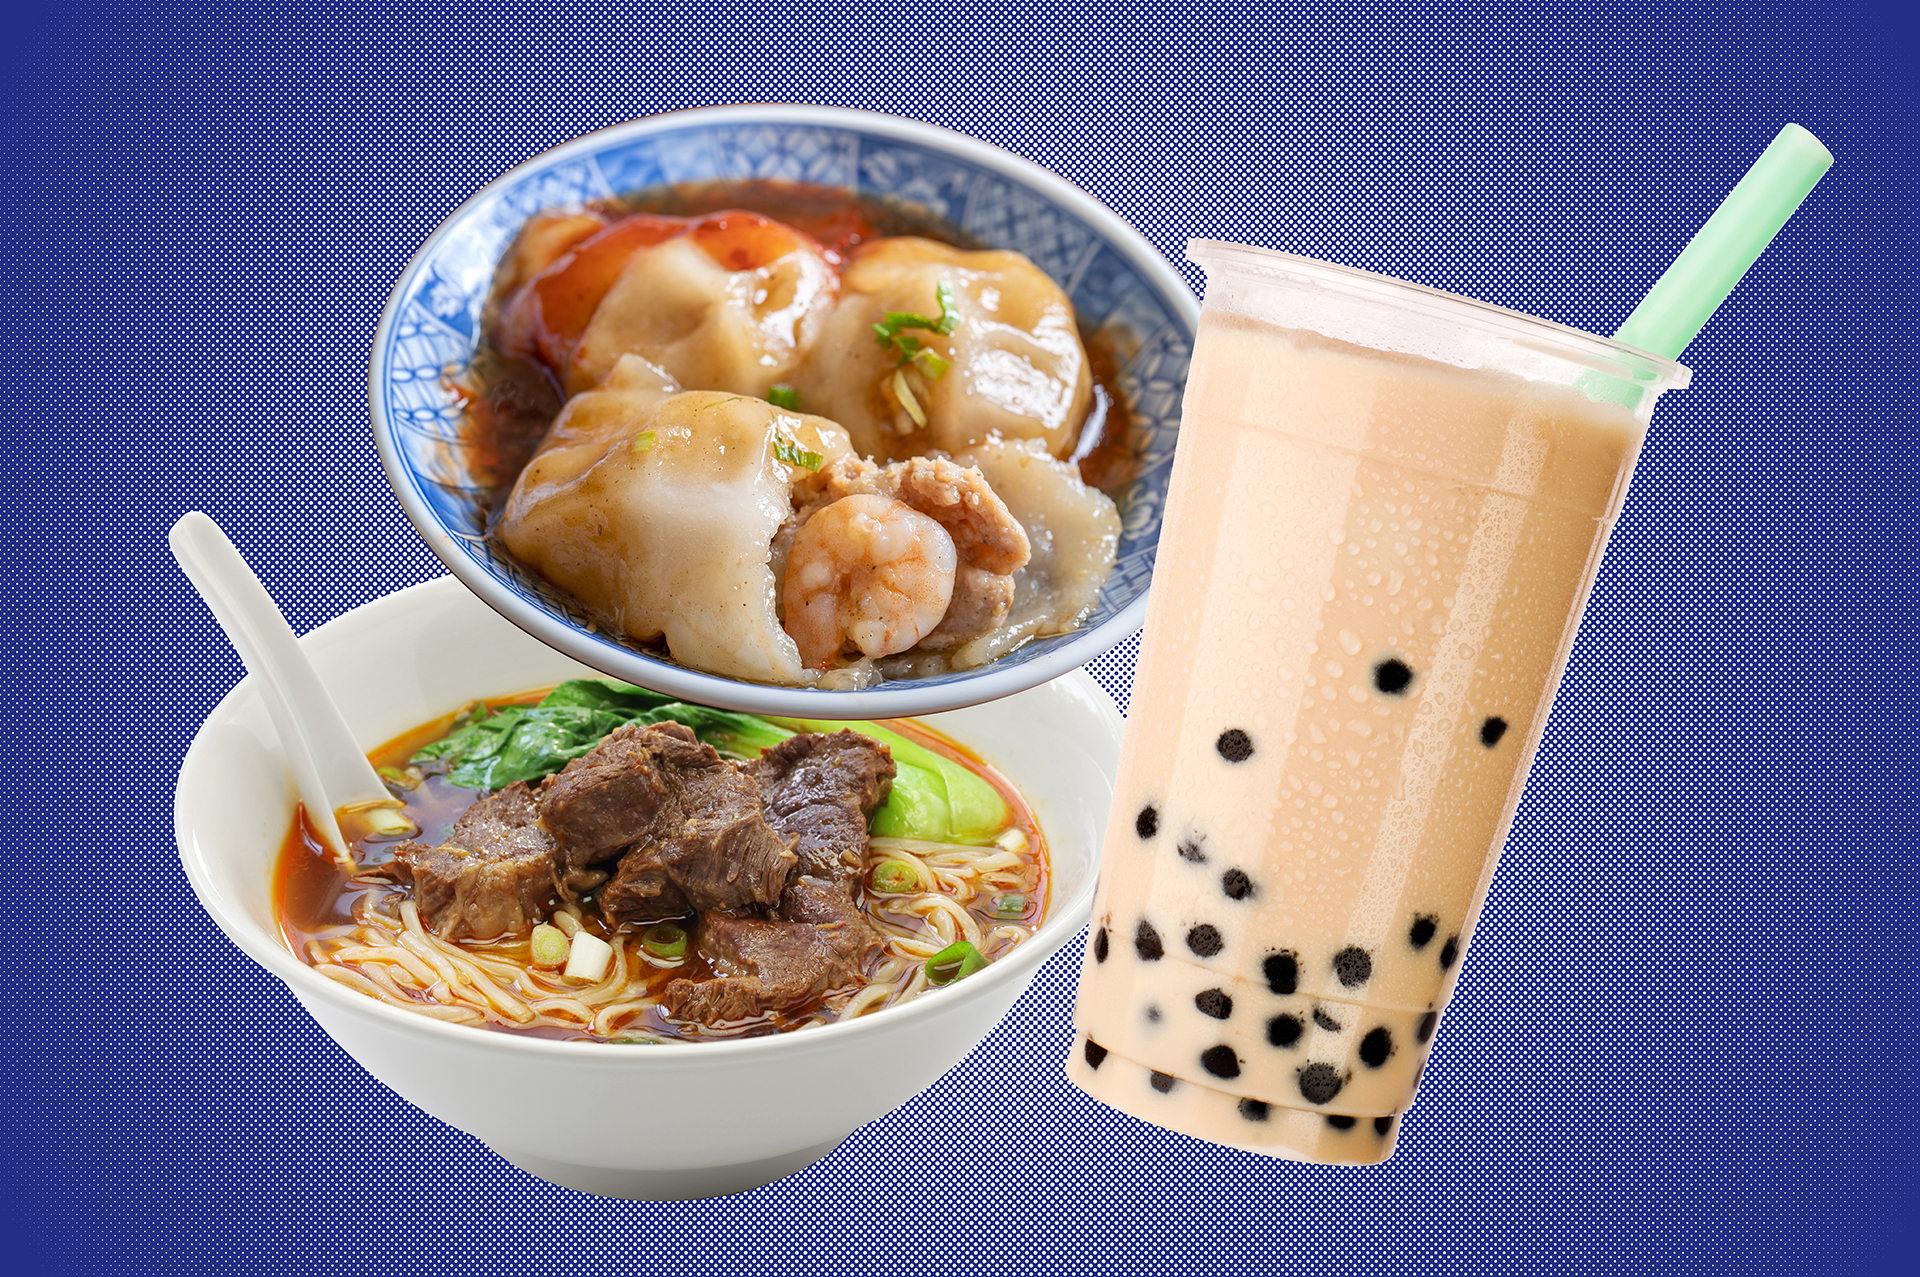 A collage of Taiwanese foods (ba-wan, beef noodle soup, and boba milk tea) on a blue background.